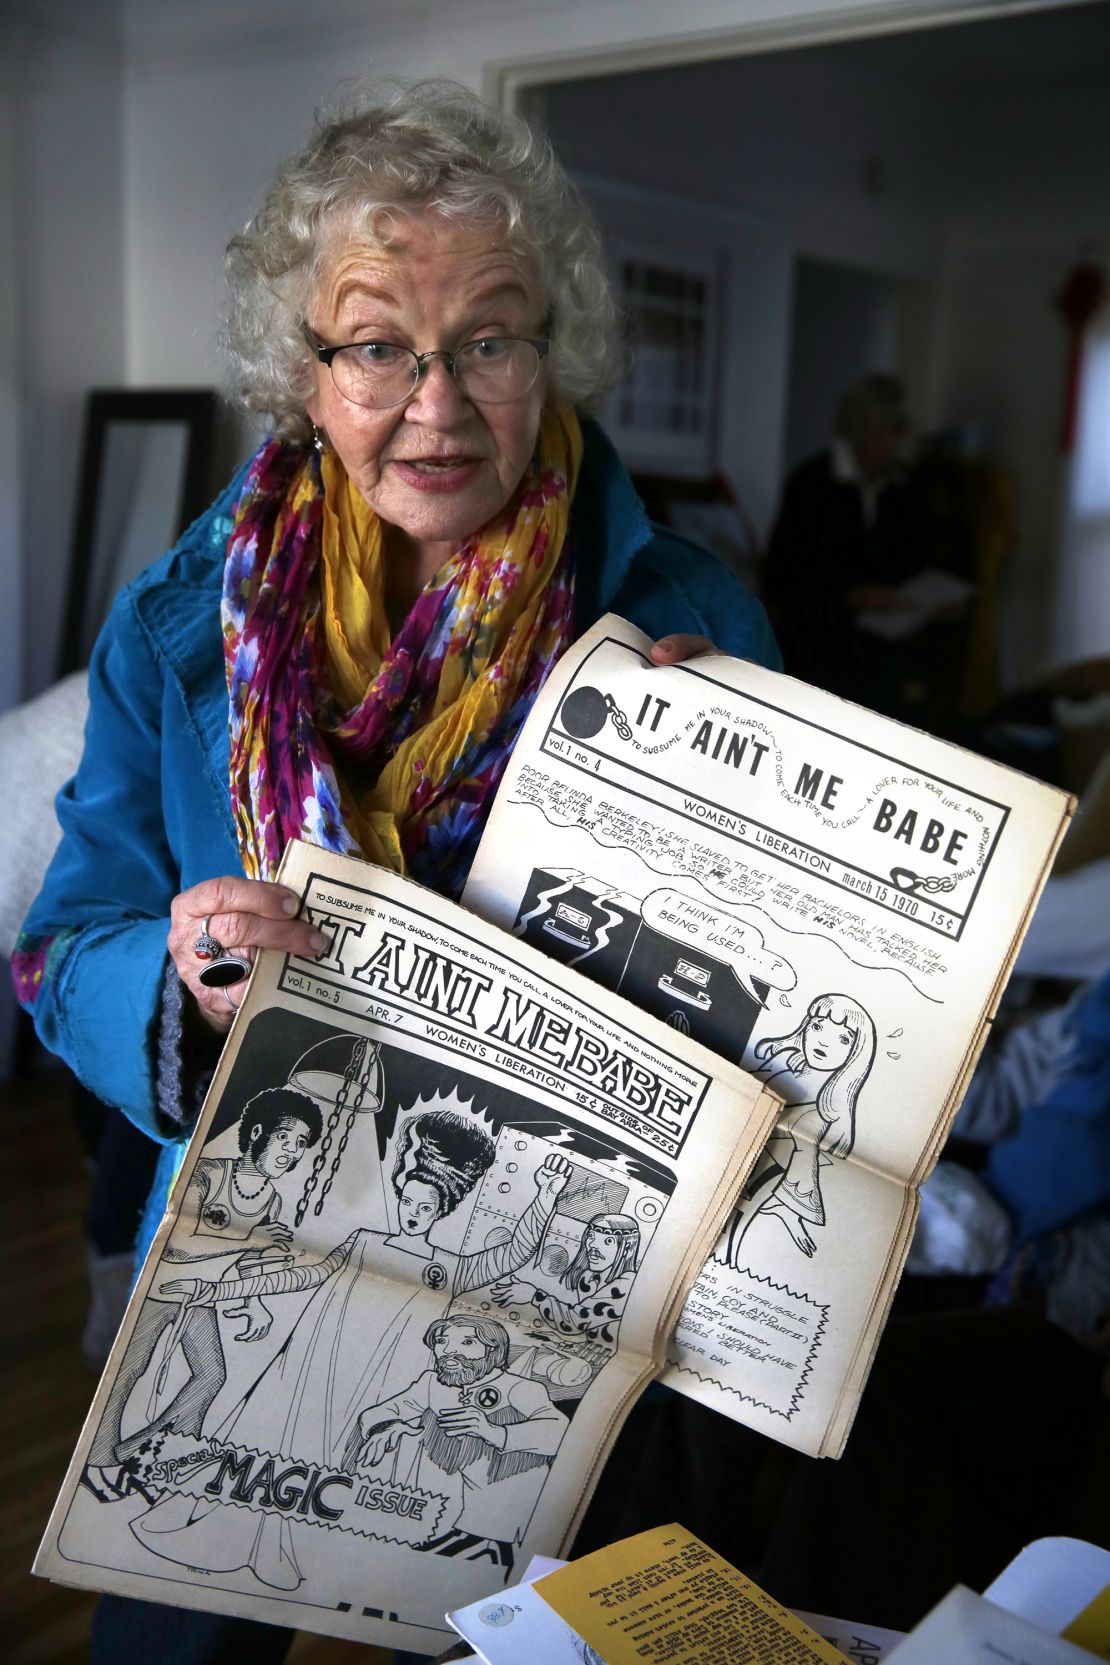 Artist Trina Robbins joined the staff of America's first Women's Liberation newspaper, the Berkeley-based 'It Ain't Me, Babe in 1970' showing past issues at Alta's home in Oakland, Calif., on Thursday, January 22, 2015.